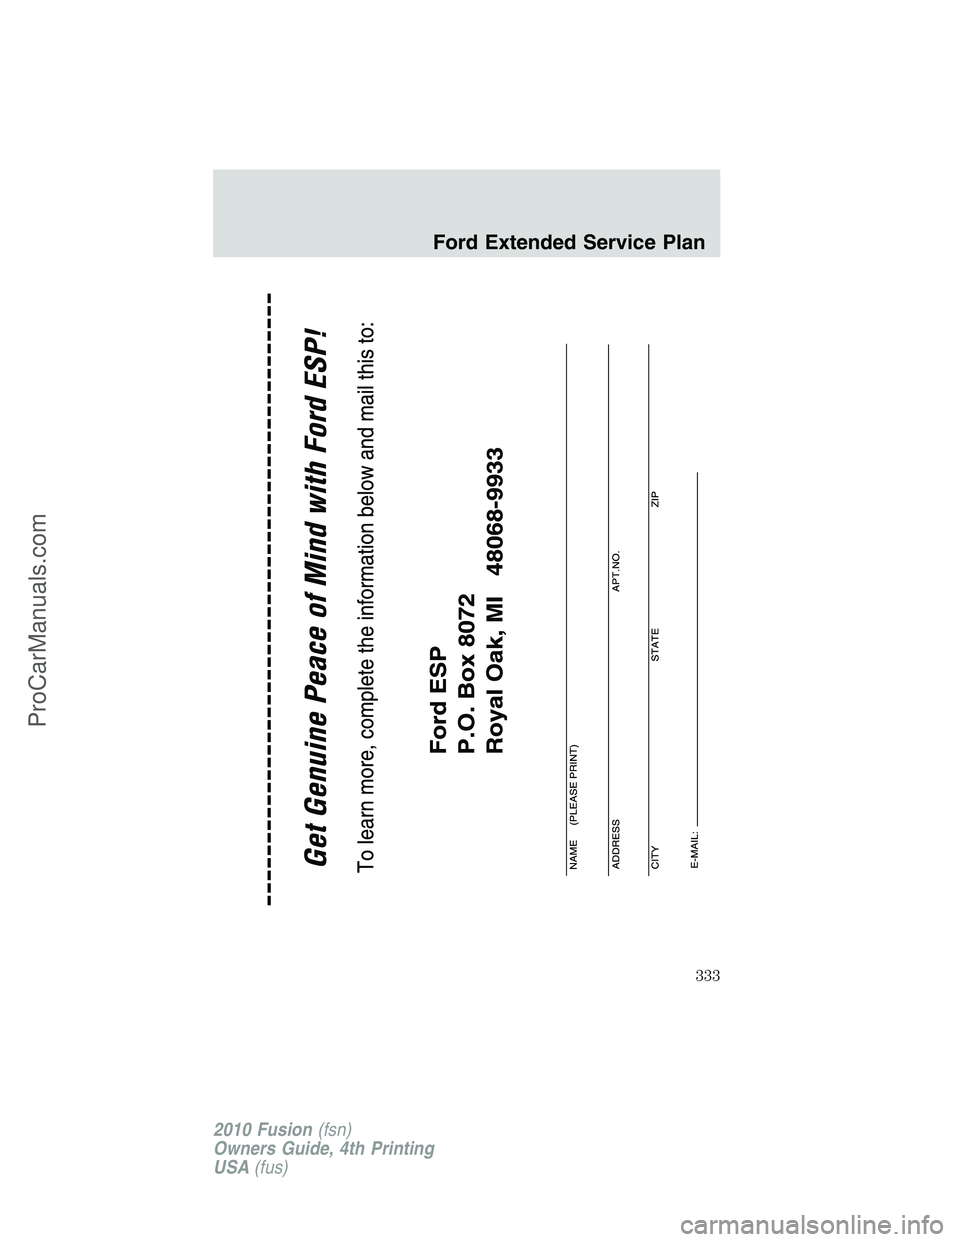 FORD FUSION 2010  Owners Manual Ford Extended Service Plan
333
2010 Fusion(fsn)
Owners Guide, 4th Printing
USA(fus)
ProCarManuals.com 